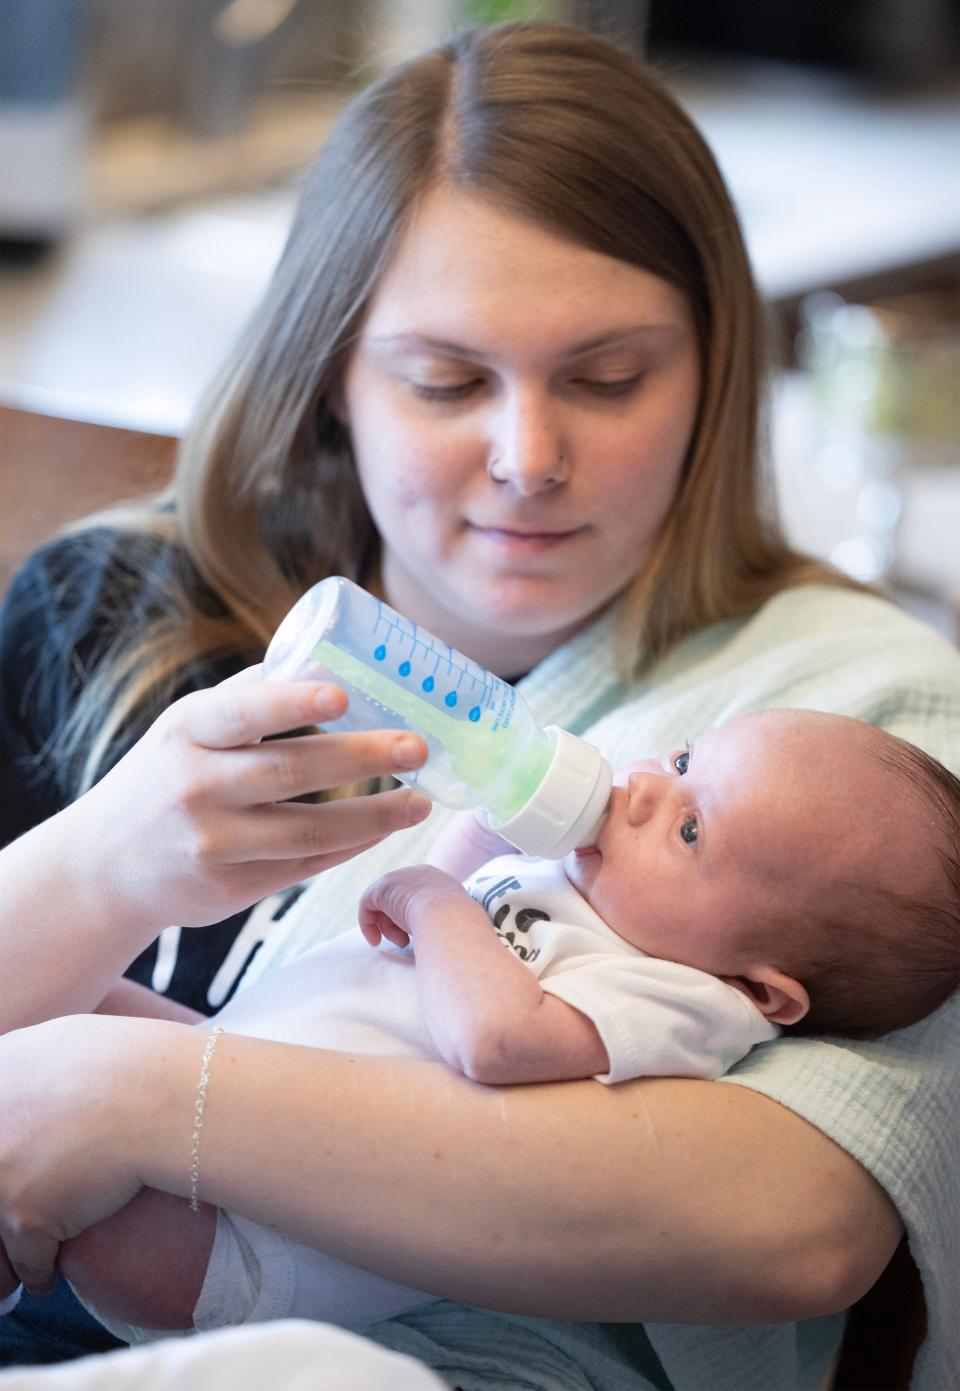 Abbi Yakunich of Massillon put her newborn, Paxton Denham, on formula after she had difficulty producing enough milk, and what she was able produce gave him stomach cramps. The issue is more common than people think said Carol Frient, a local lactation expert.